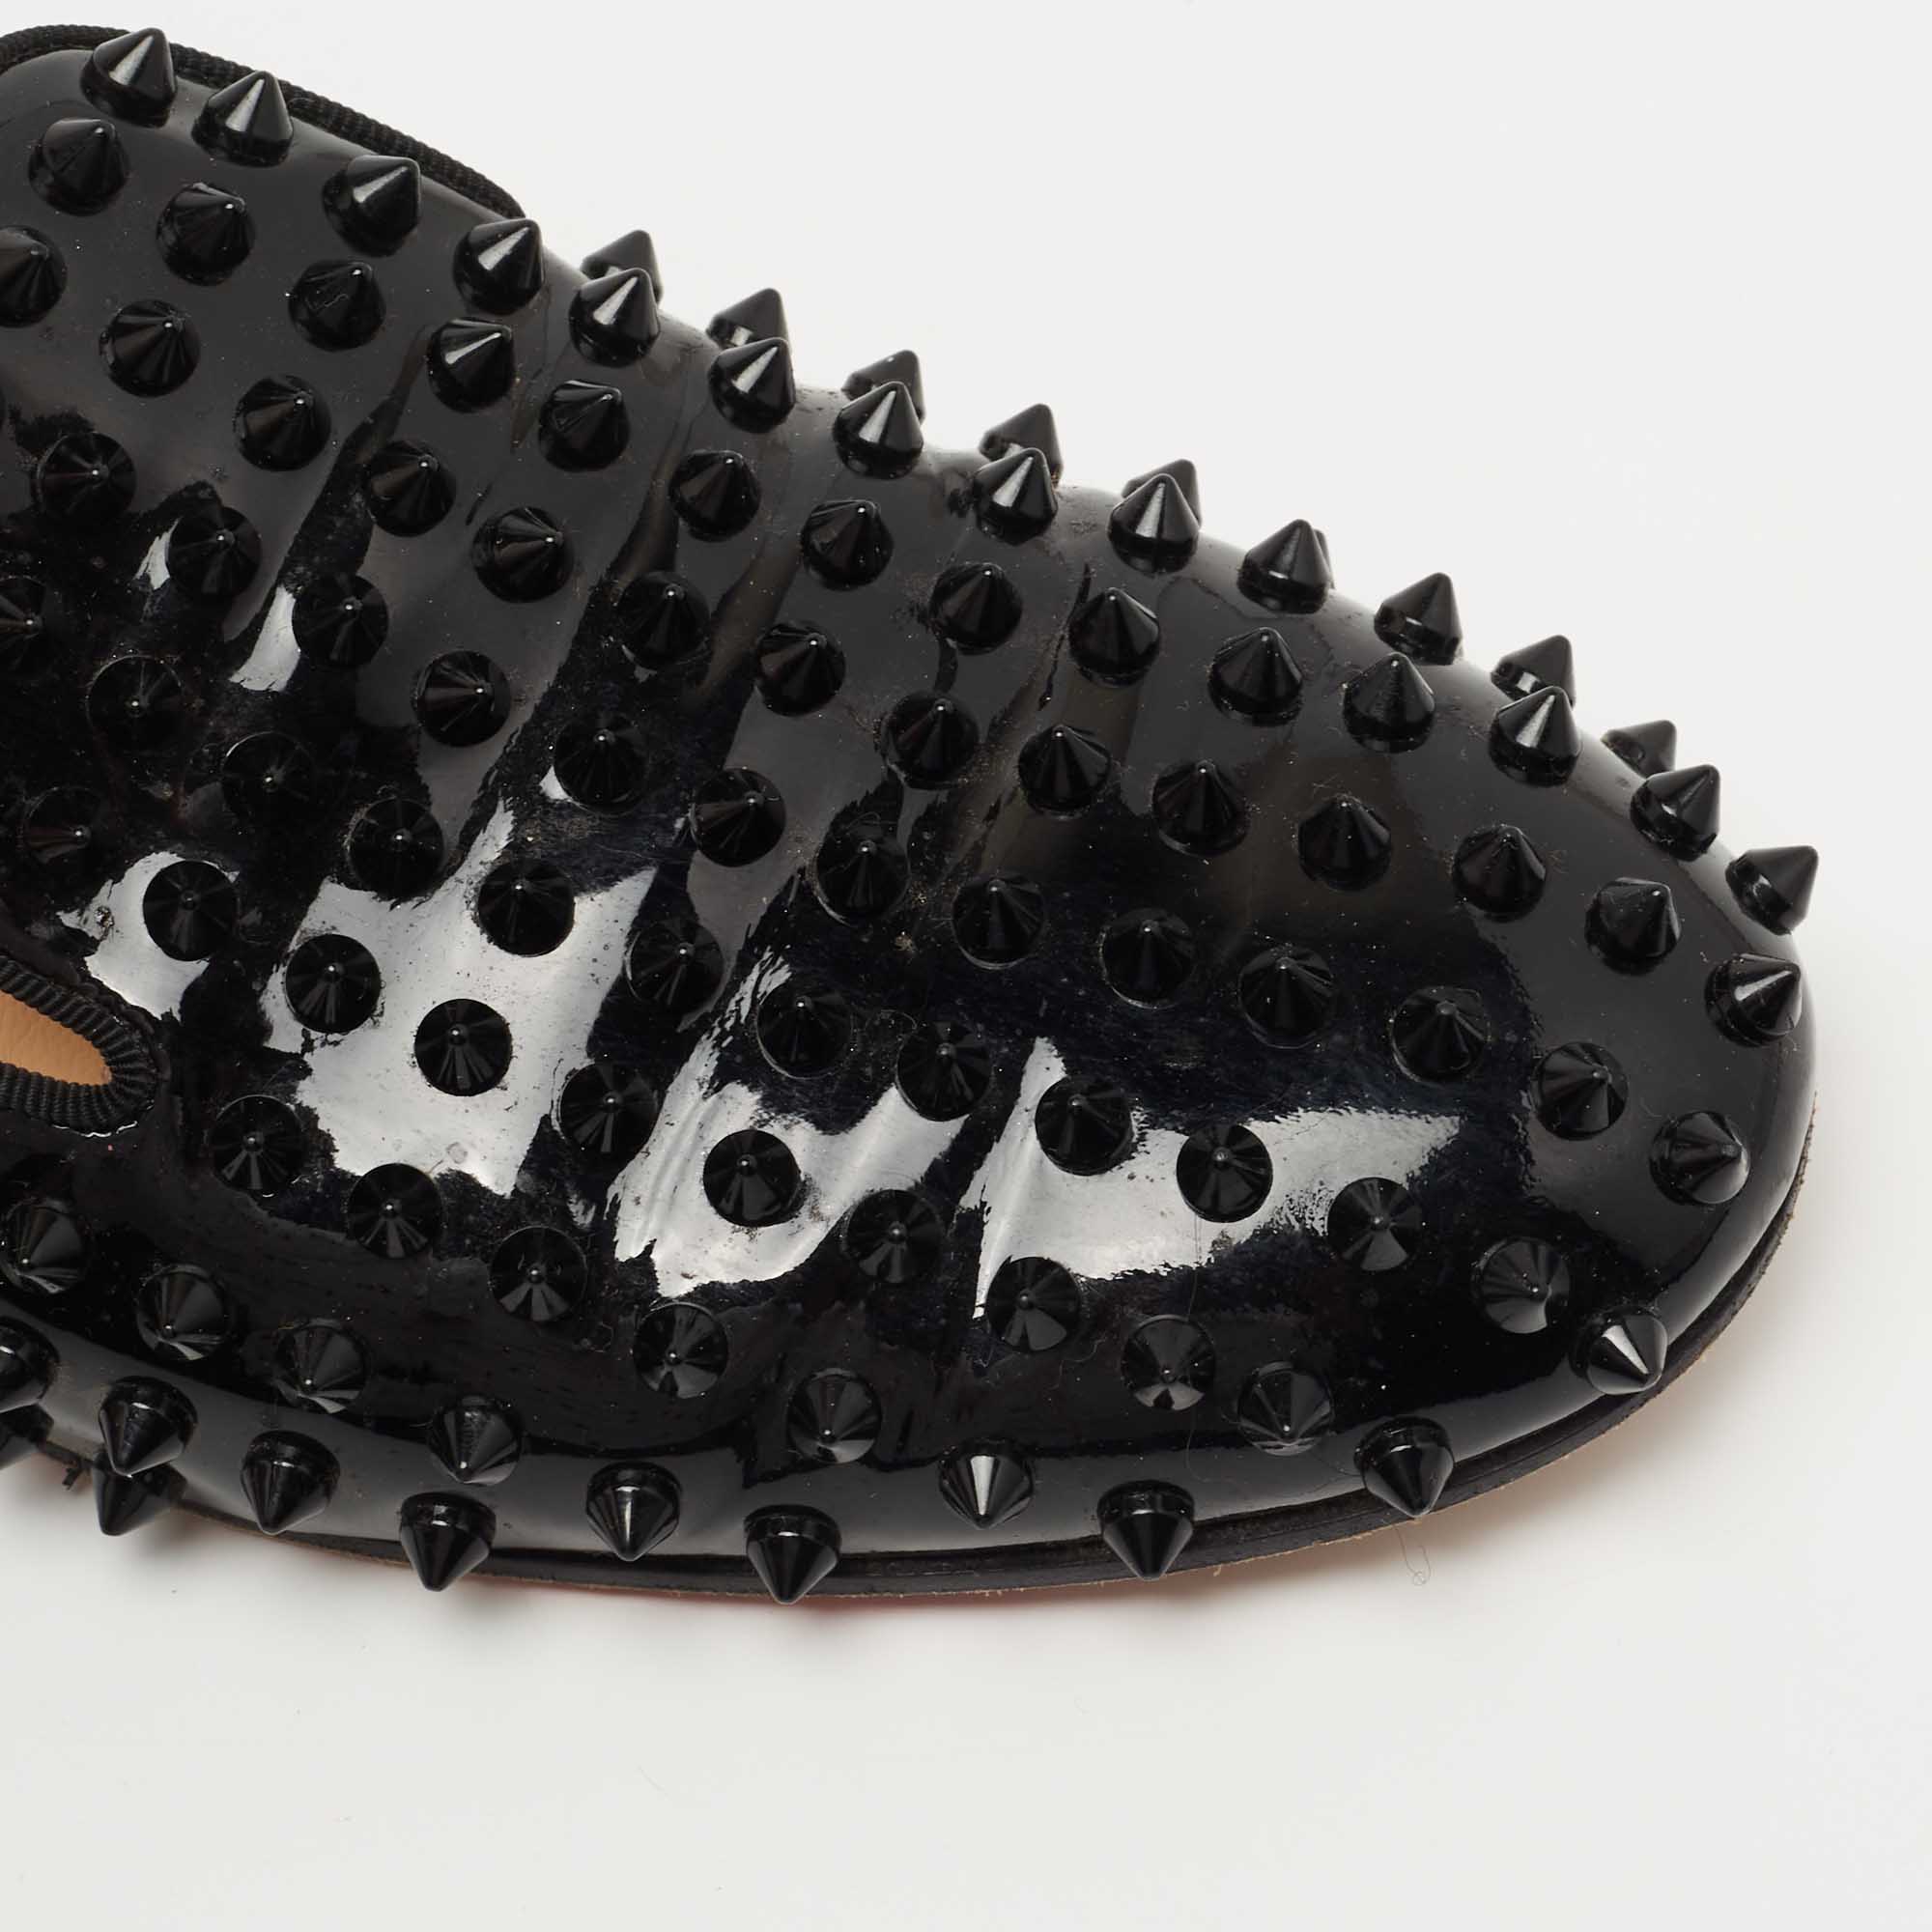 Christian Louboutin Black Patent Dandelion Spikes Loafers Size 39.5